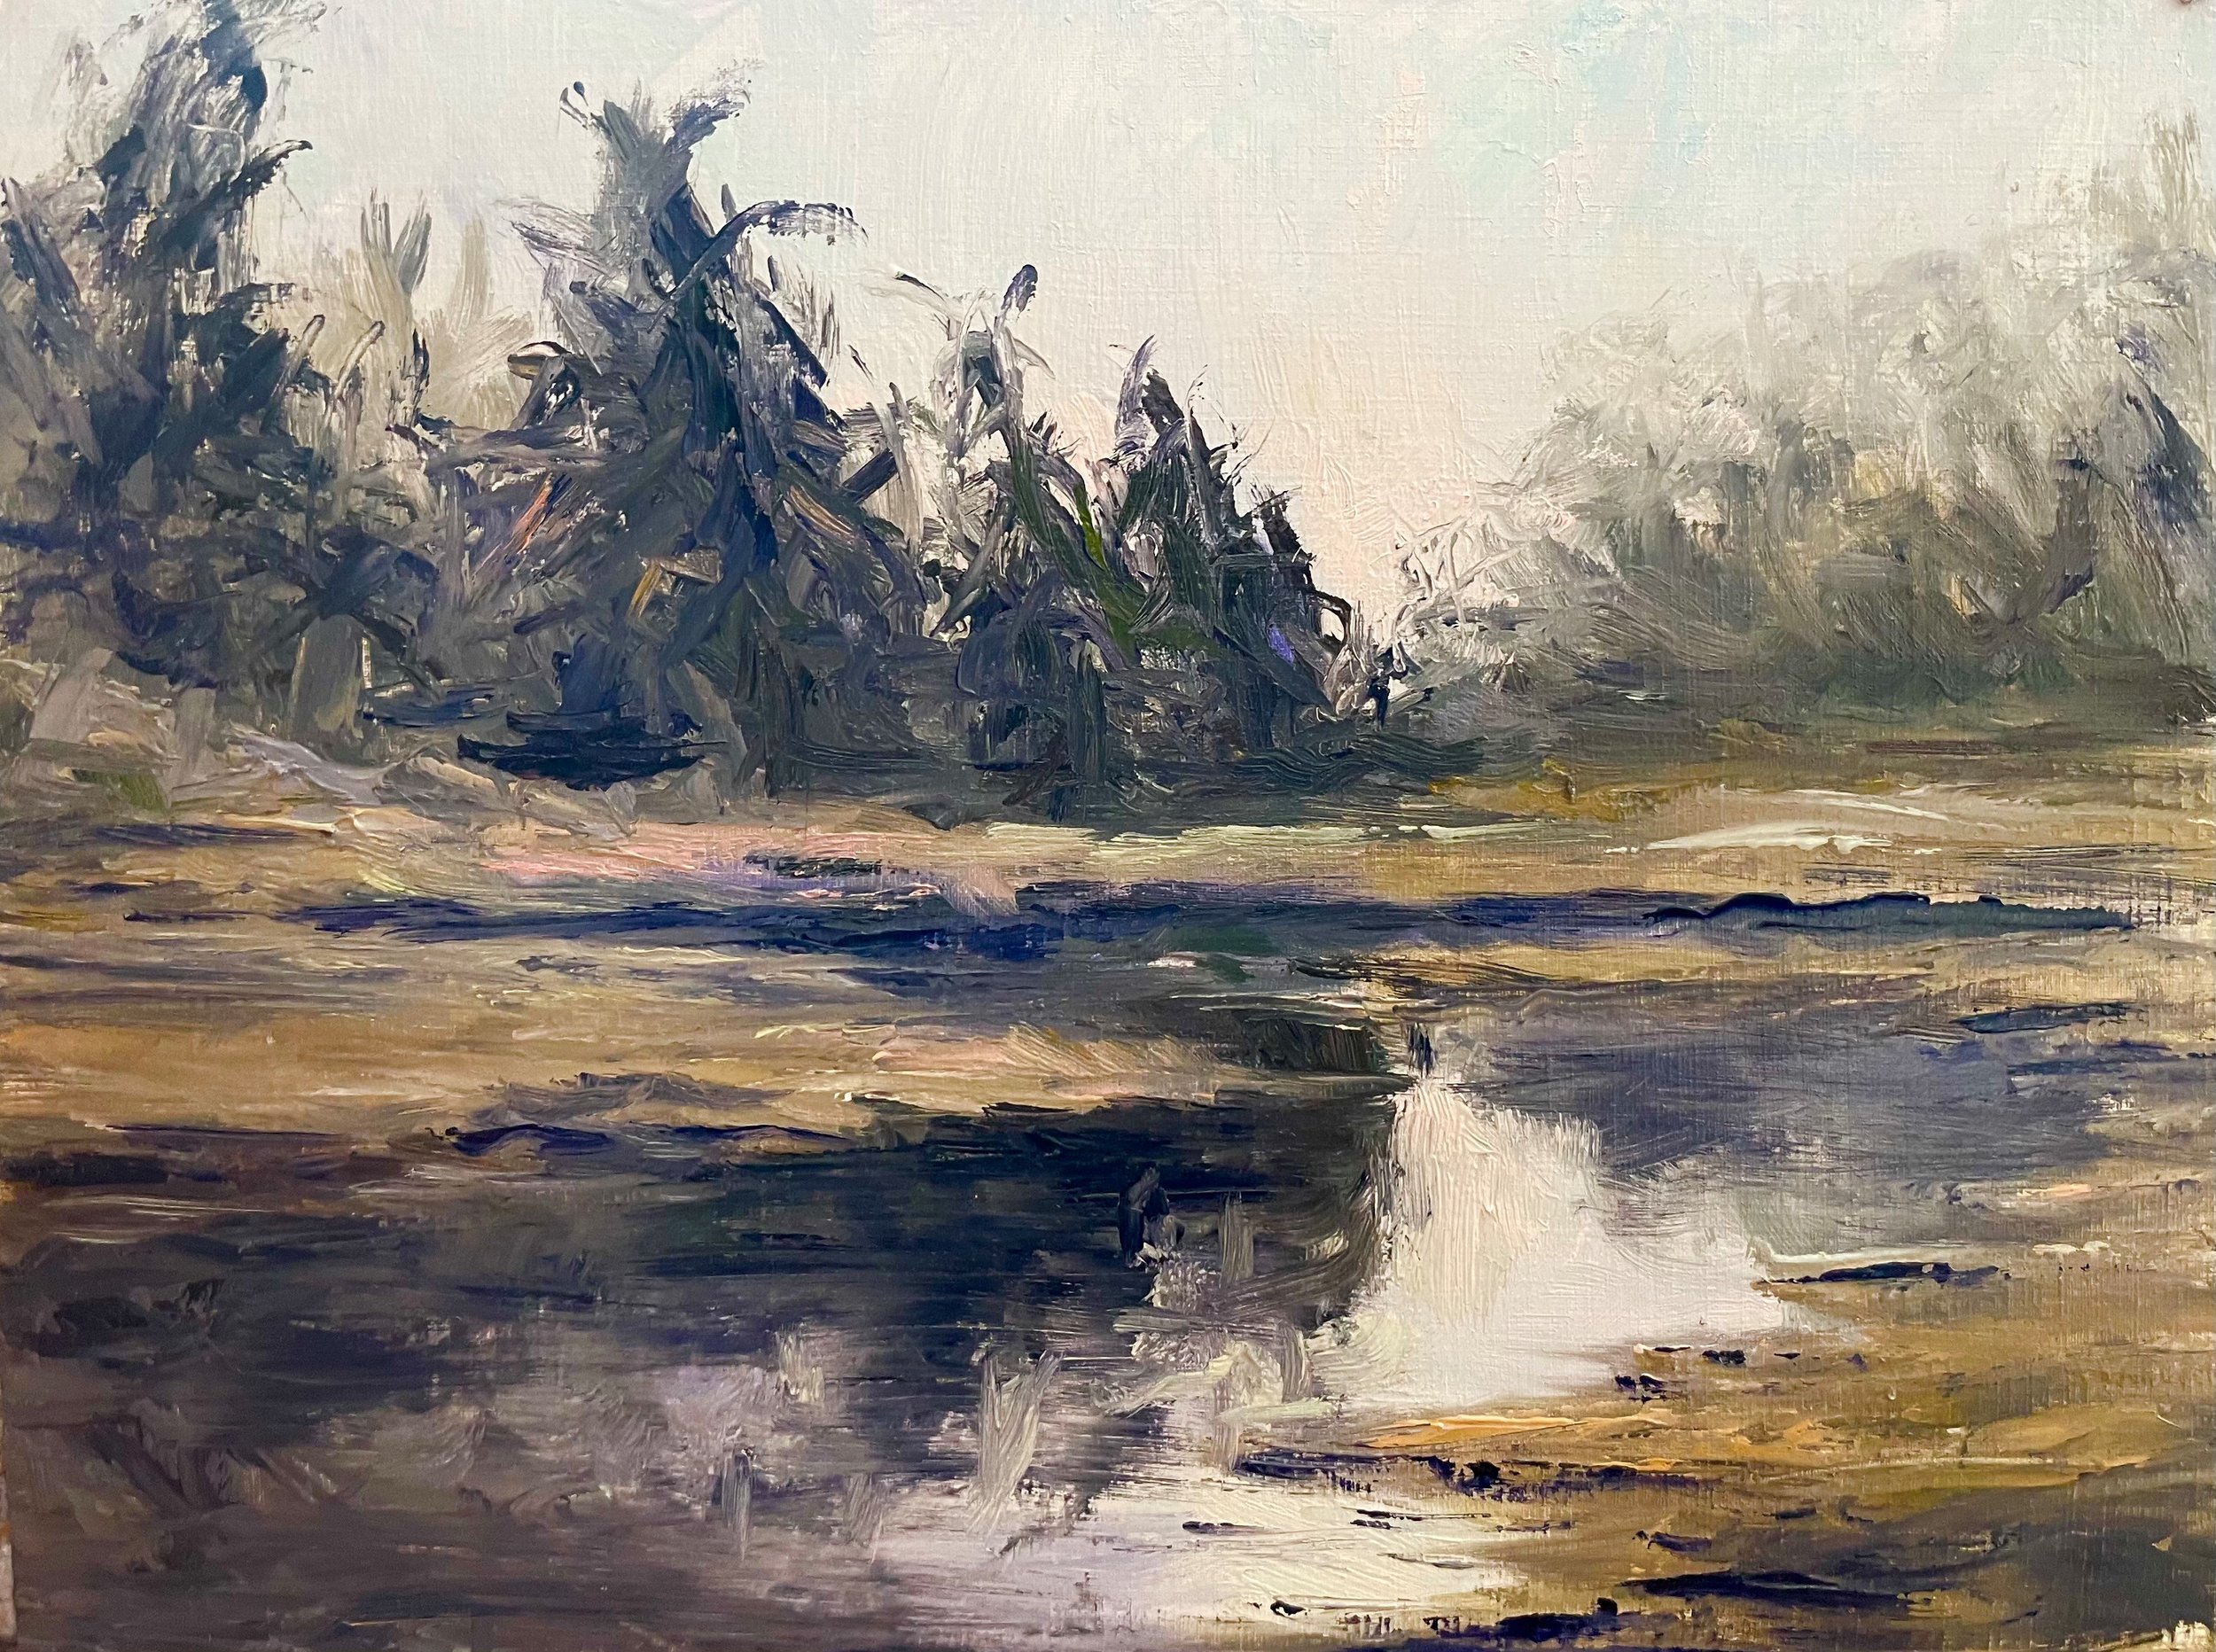 21-03-22     Granberry’s Marsh Creek      Oil on Gesso Paper    9 x 12 inches.jpg